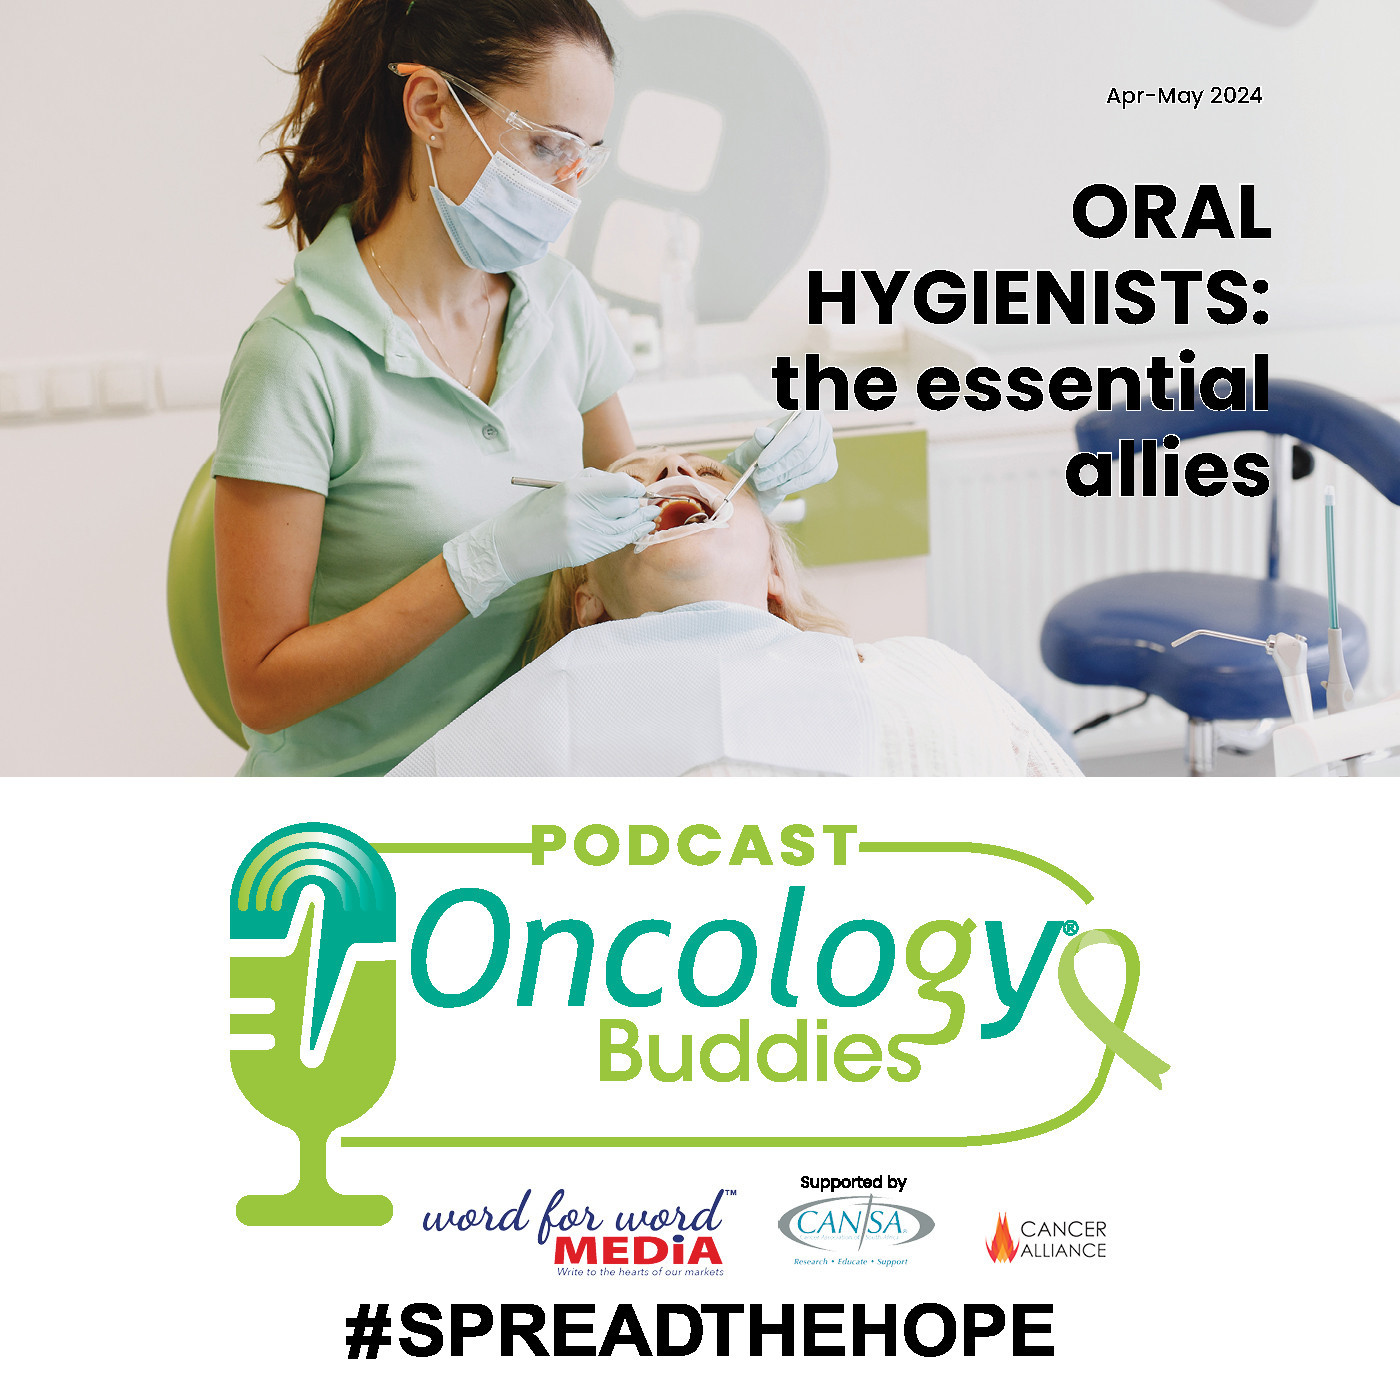 Oral hygienists: the essential allies